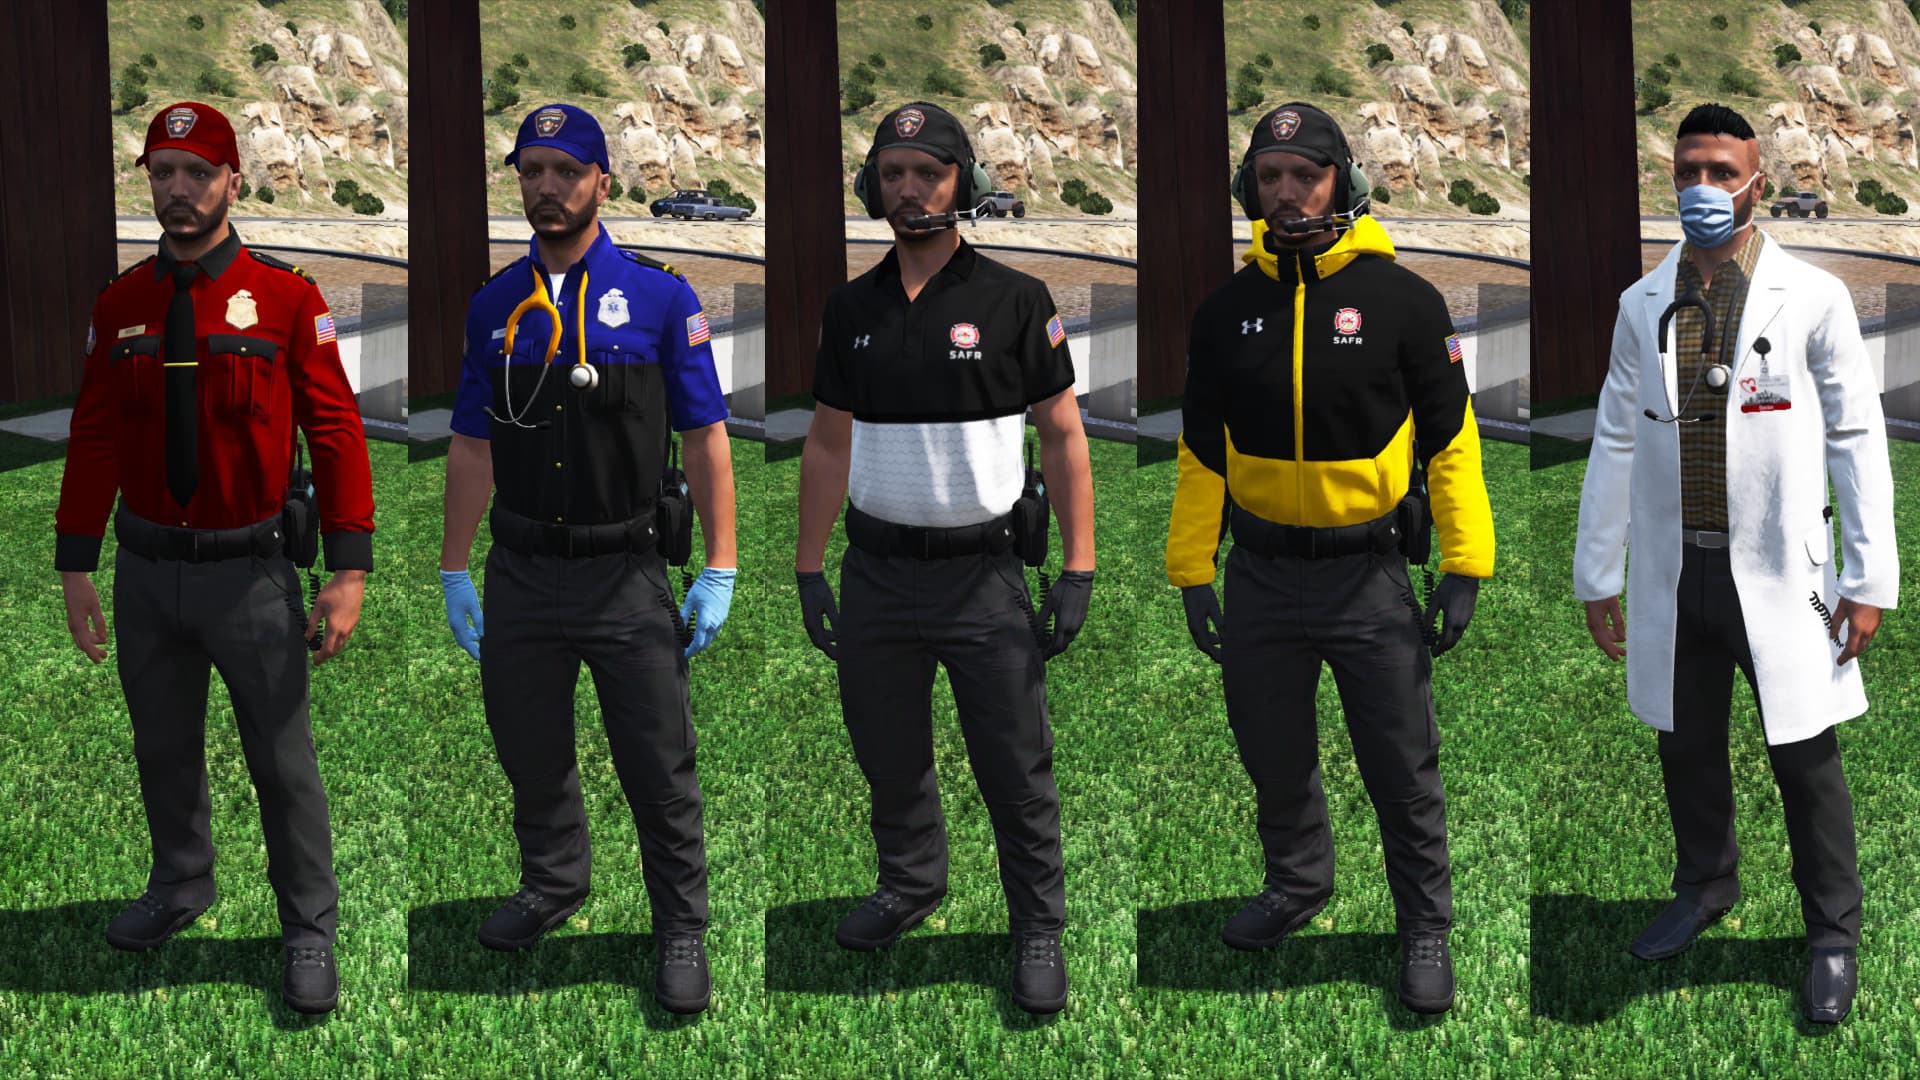 Afterlife roleplay looking for new city members, EMS LSPD Custom MLO's.  Join the discord for more info!! : r/FiveMRPServers